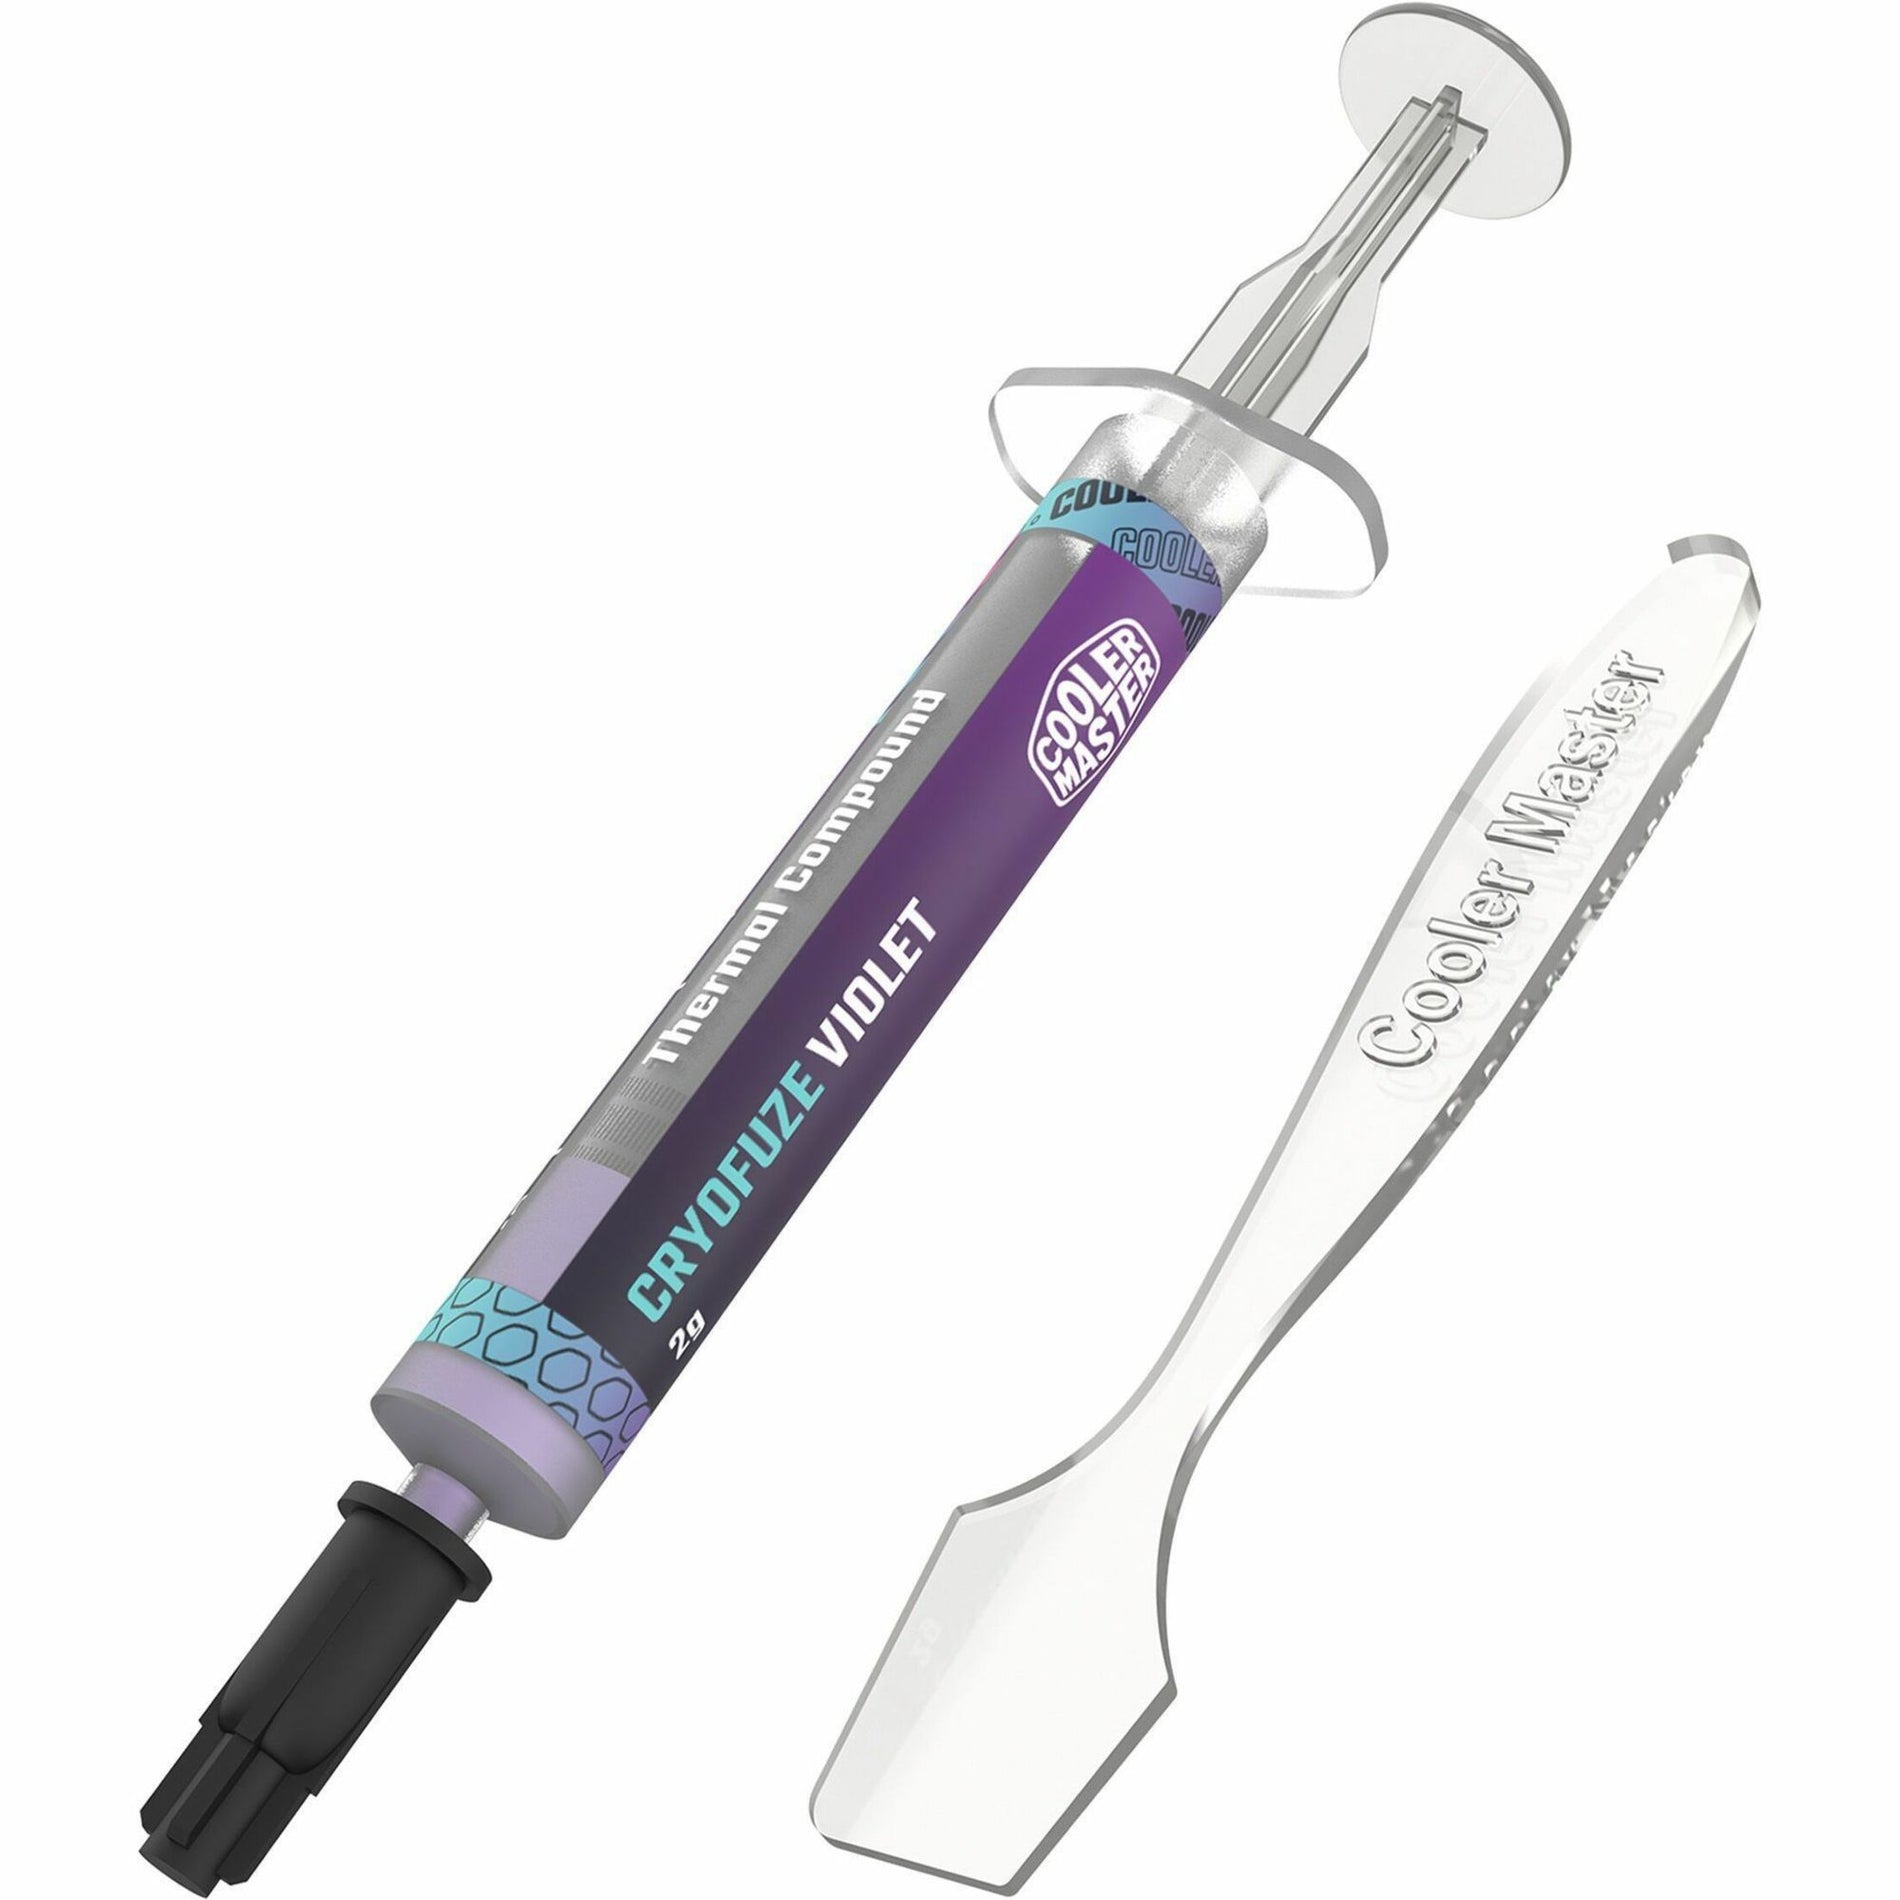 Cooler Master MGY-NOSG-N07M-R1 Thermal Grease Cryofuze, High Performance Cooling Solution